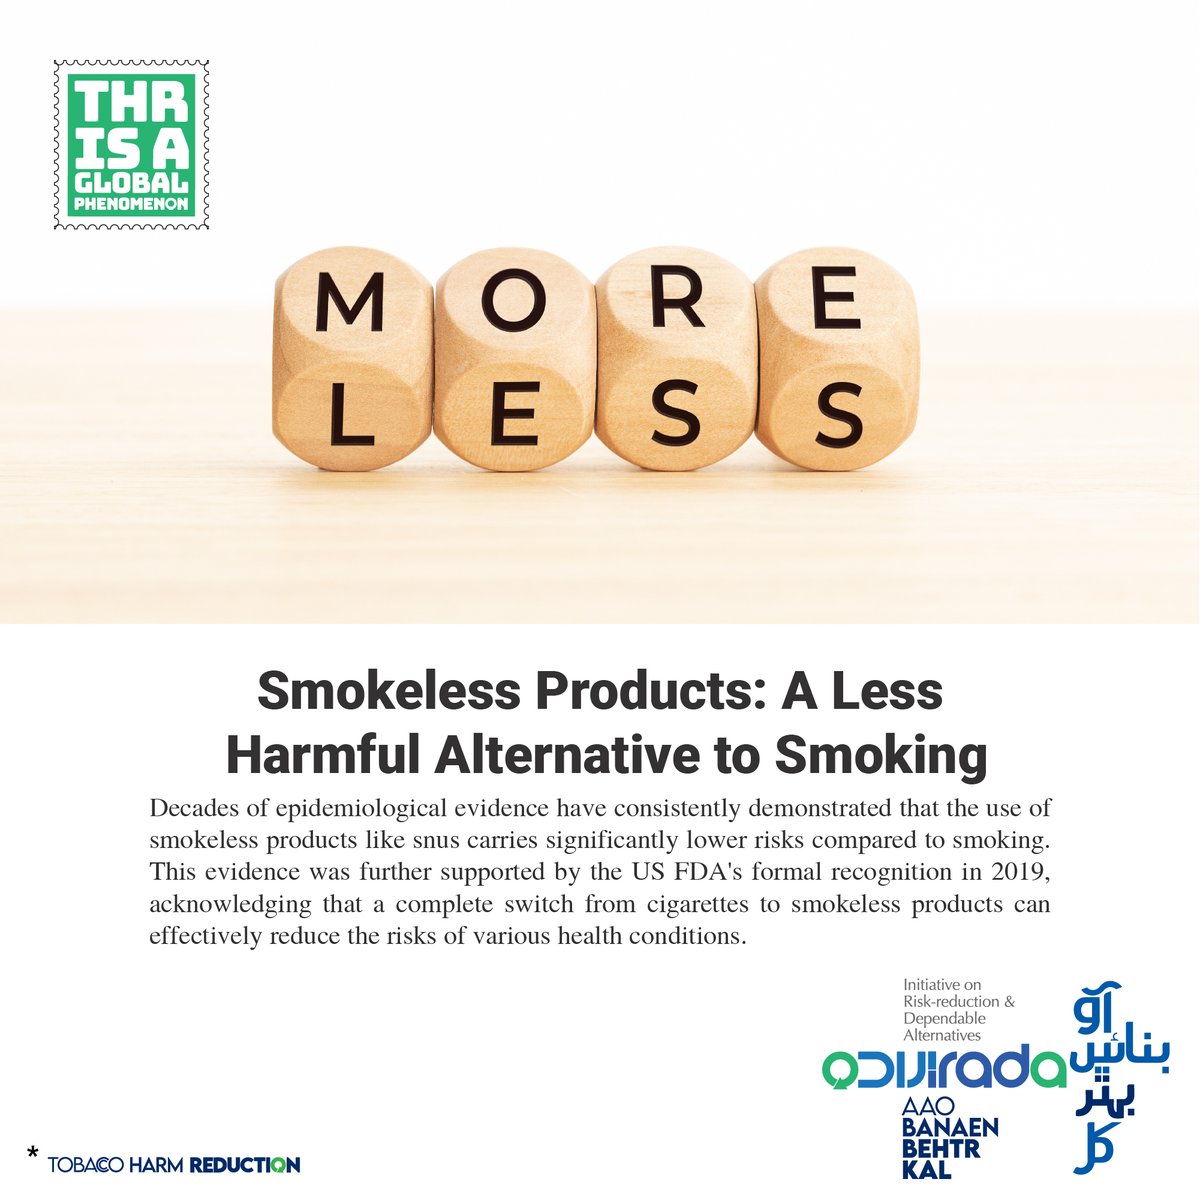 Smokeless products like snus offer a significantly safer alternative to smoking, backed by extensive research and even recognized by the US FDA. #AaoBanaenBehtrKal #breakTHRu #THR